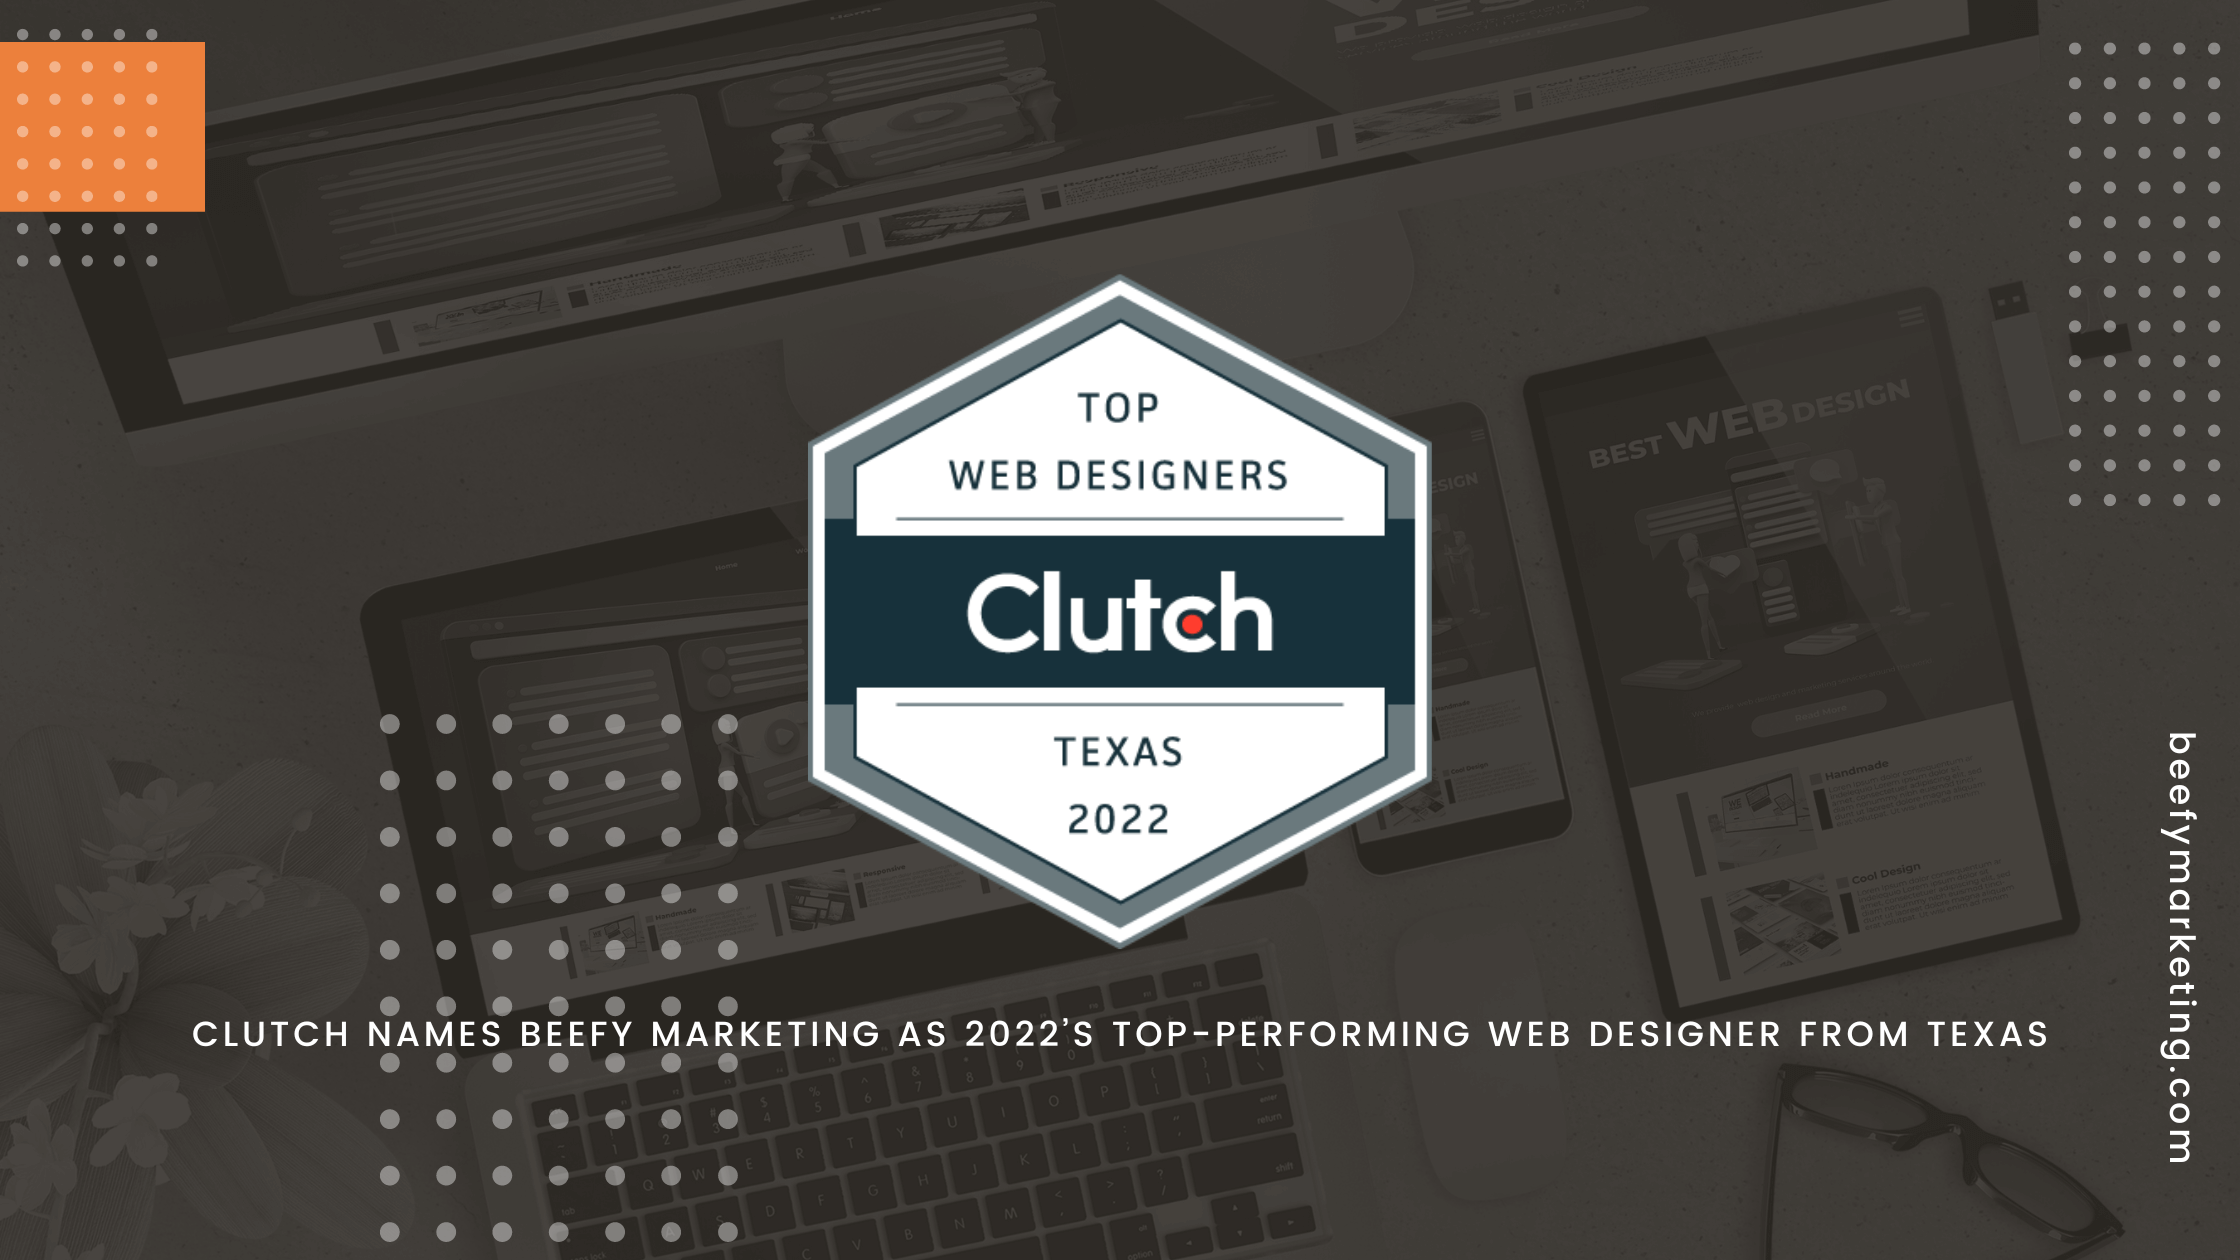 CLUTCH NAMES BEEFY MARKETING AS 2022’S TOP-PERFORMING WEB DESIGNER FROM TEXAS